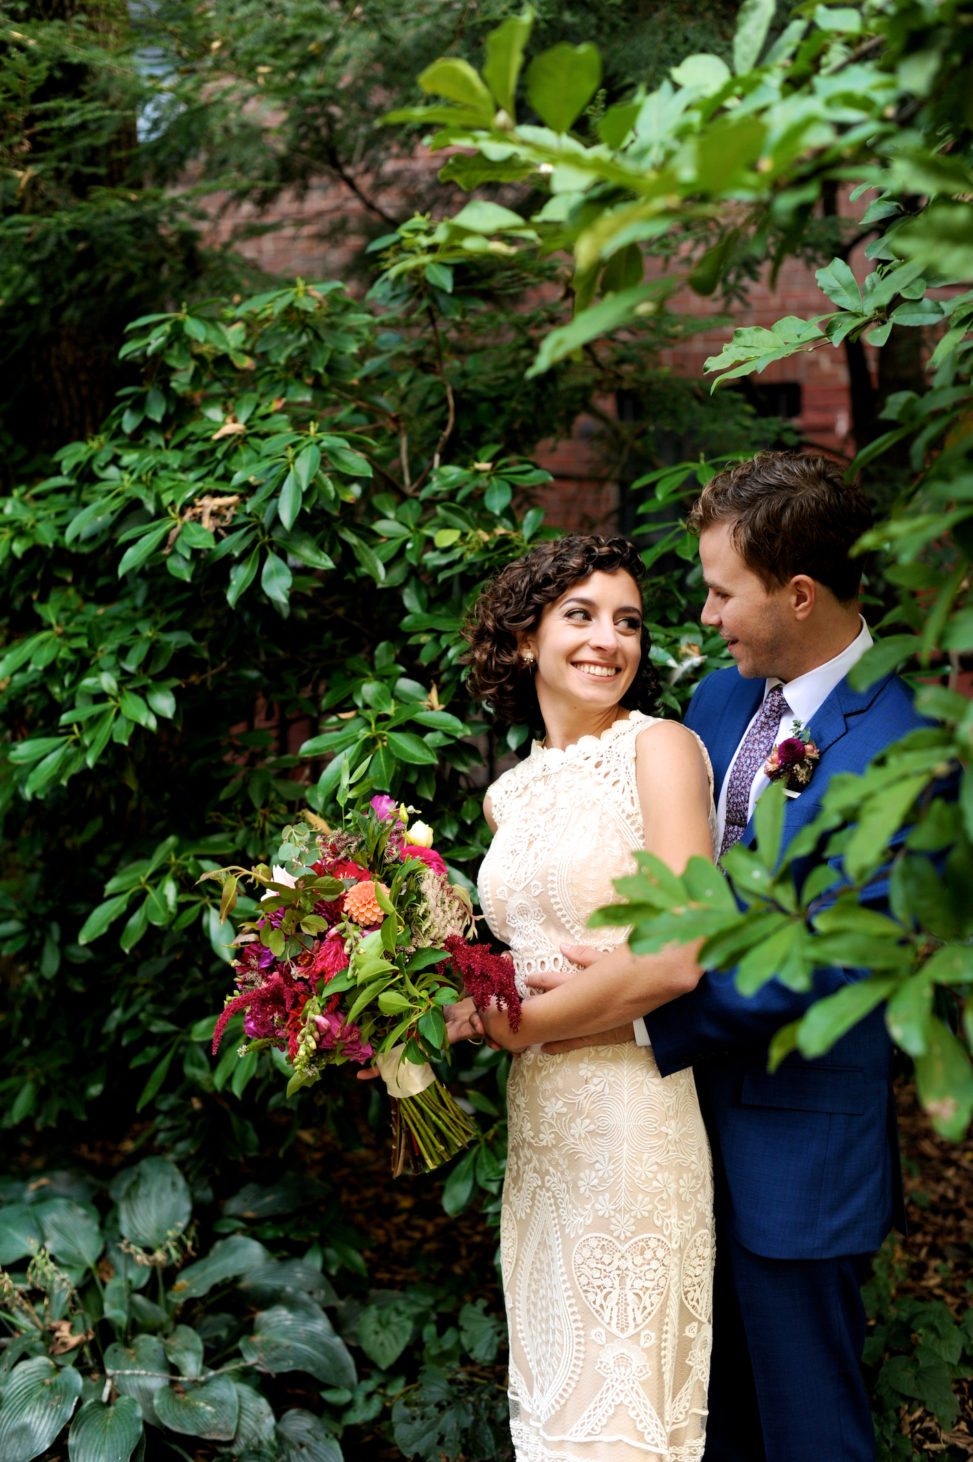 portrait of bride and groom surrounded by greenery